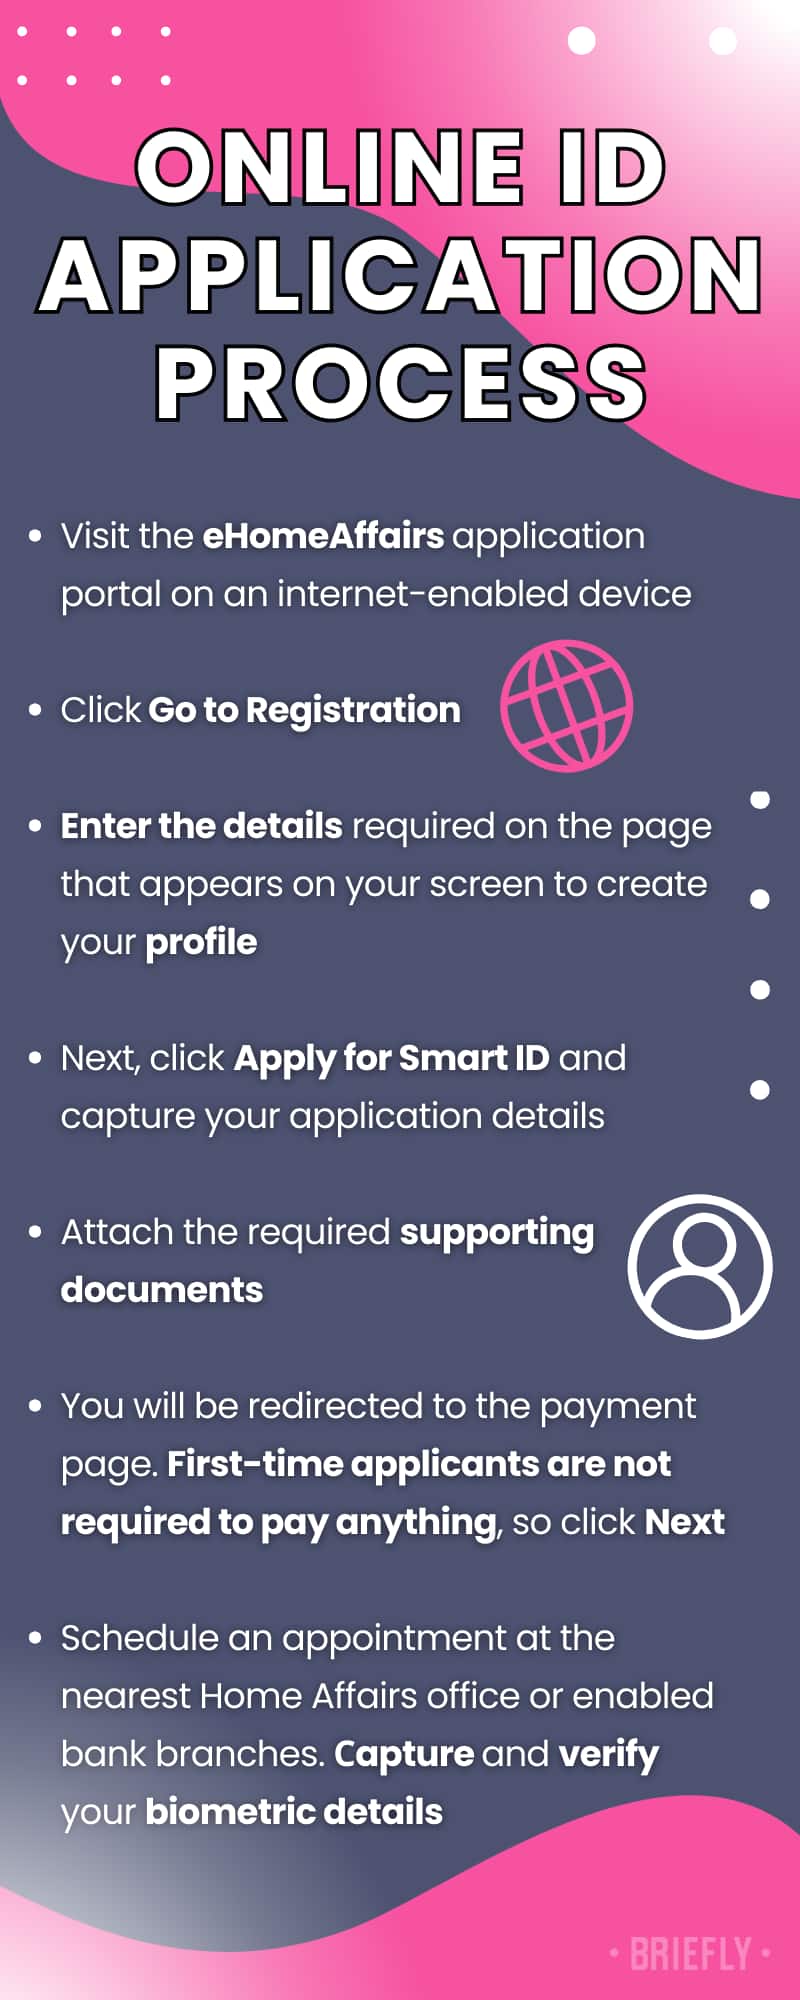 How to apply for a smart ID online